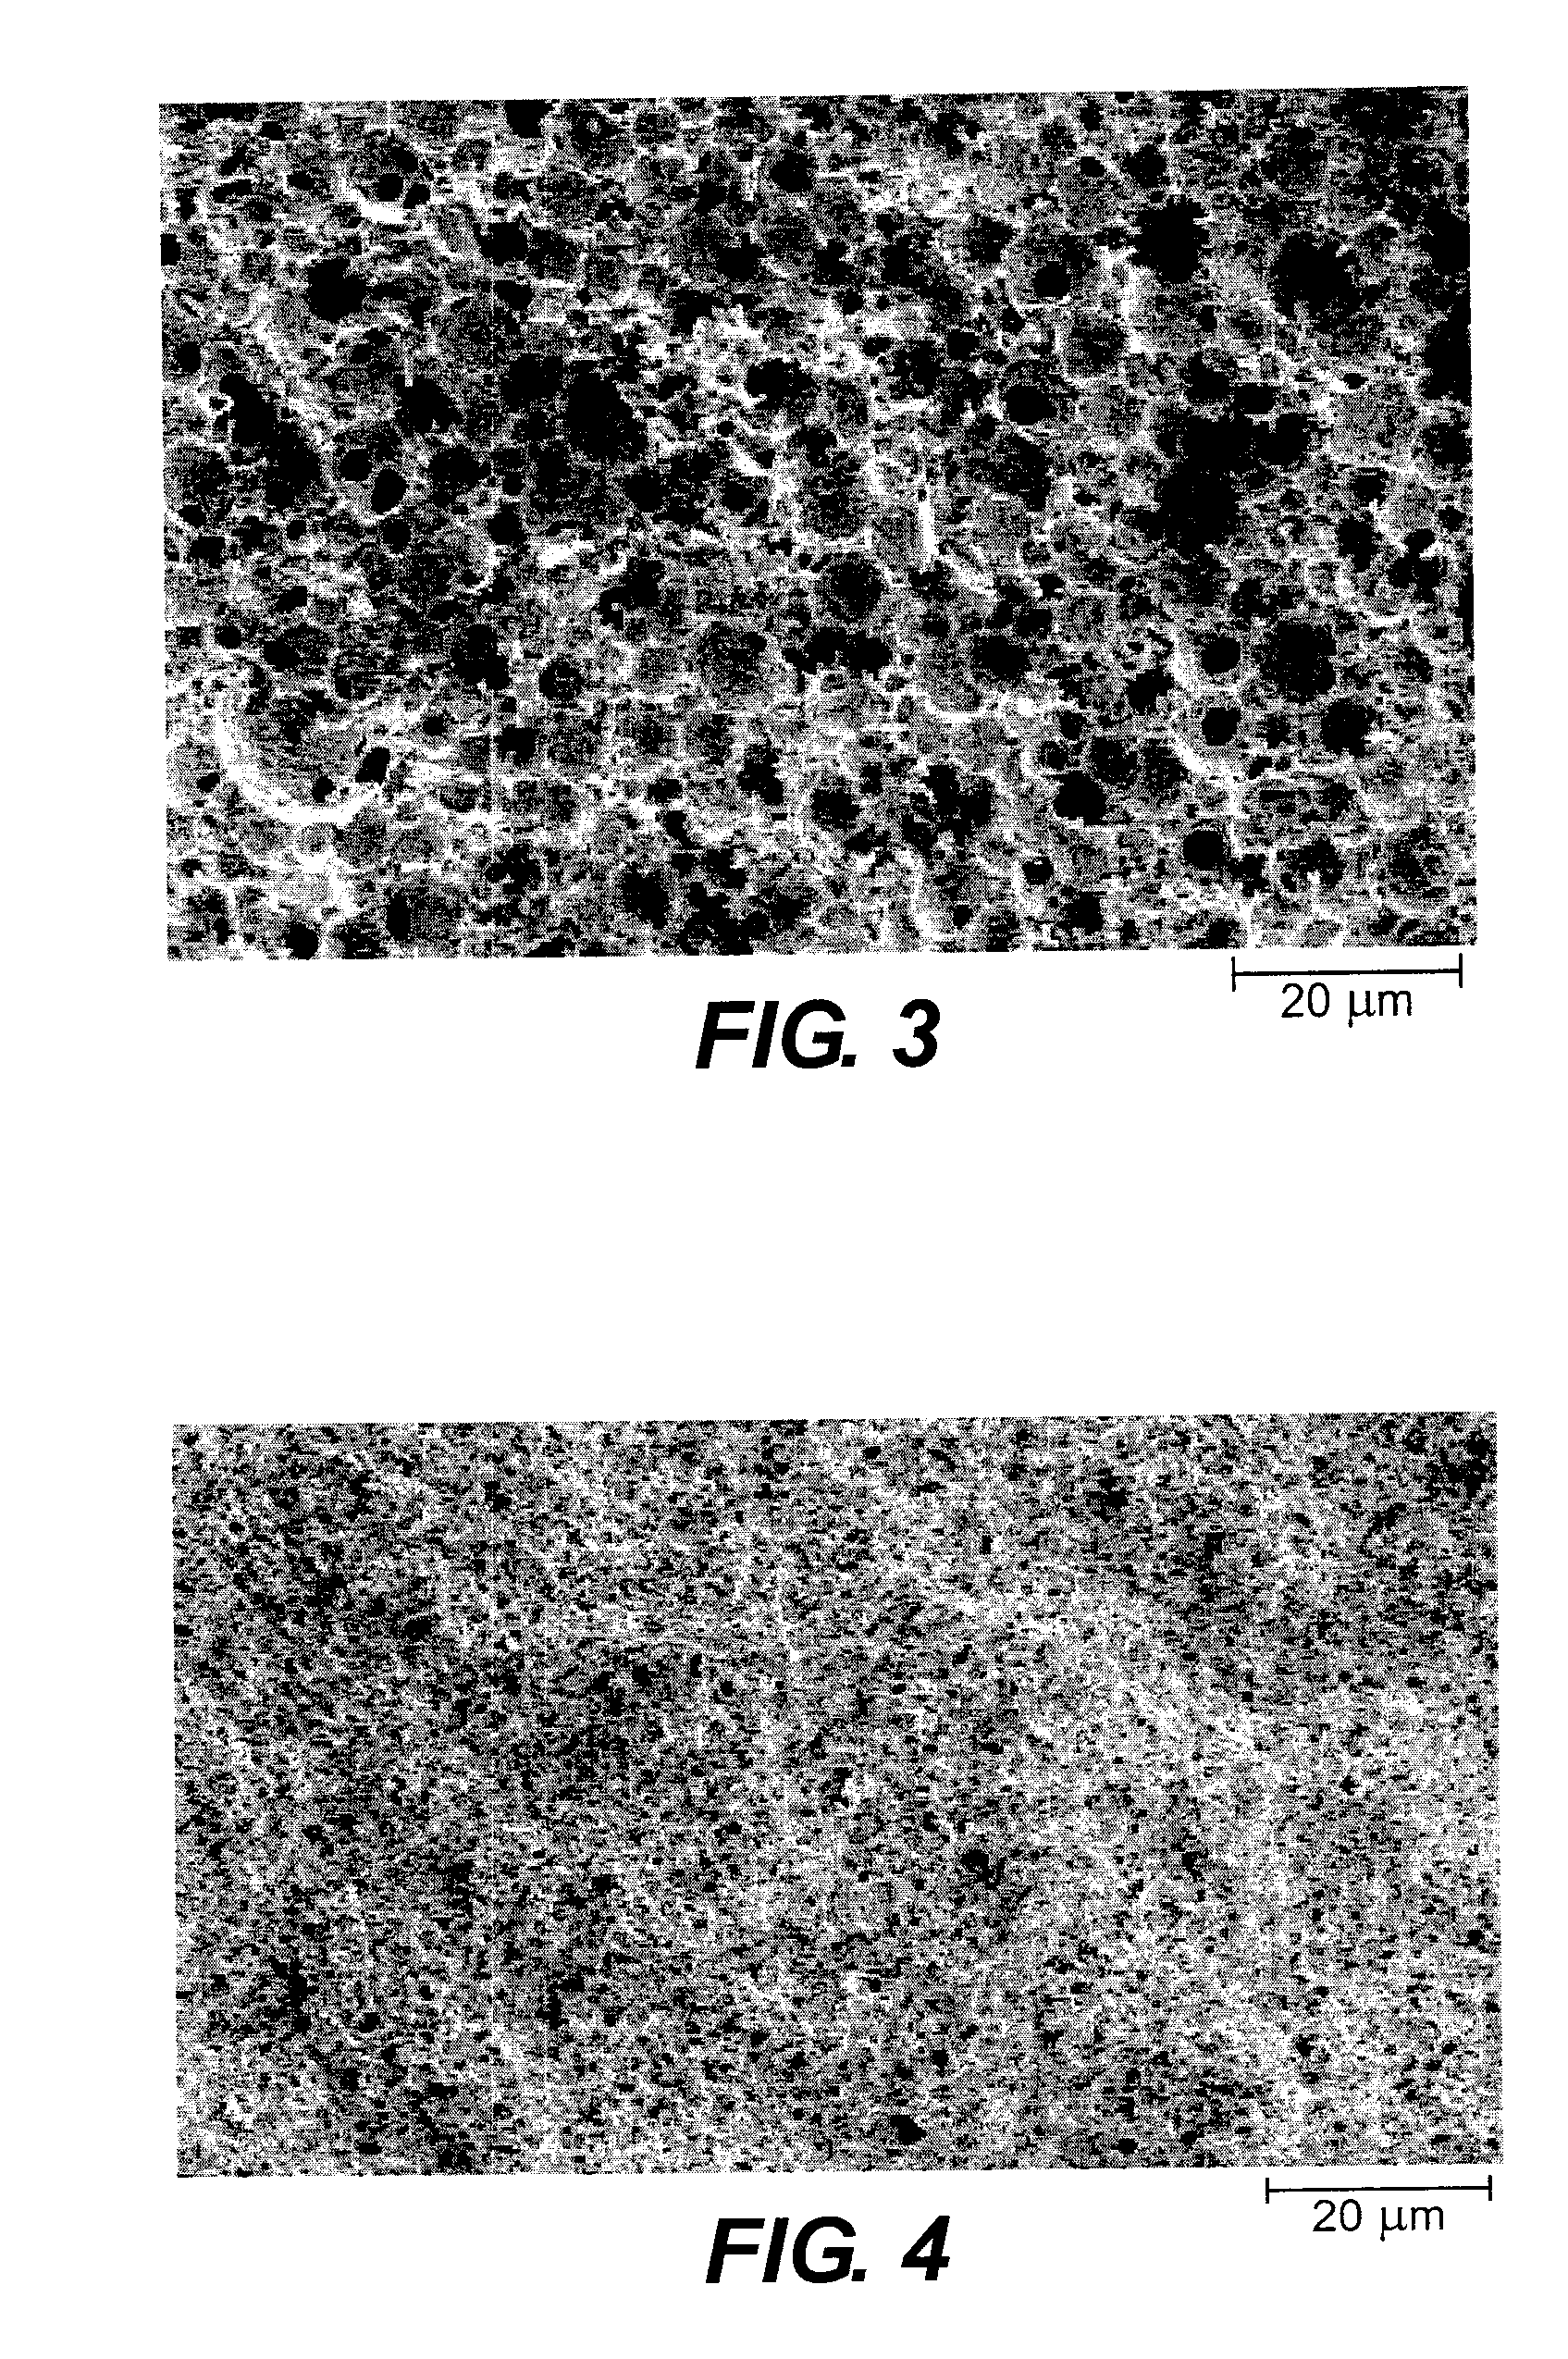 Particulate polymeric material